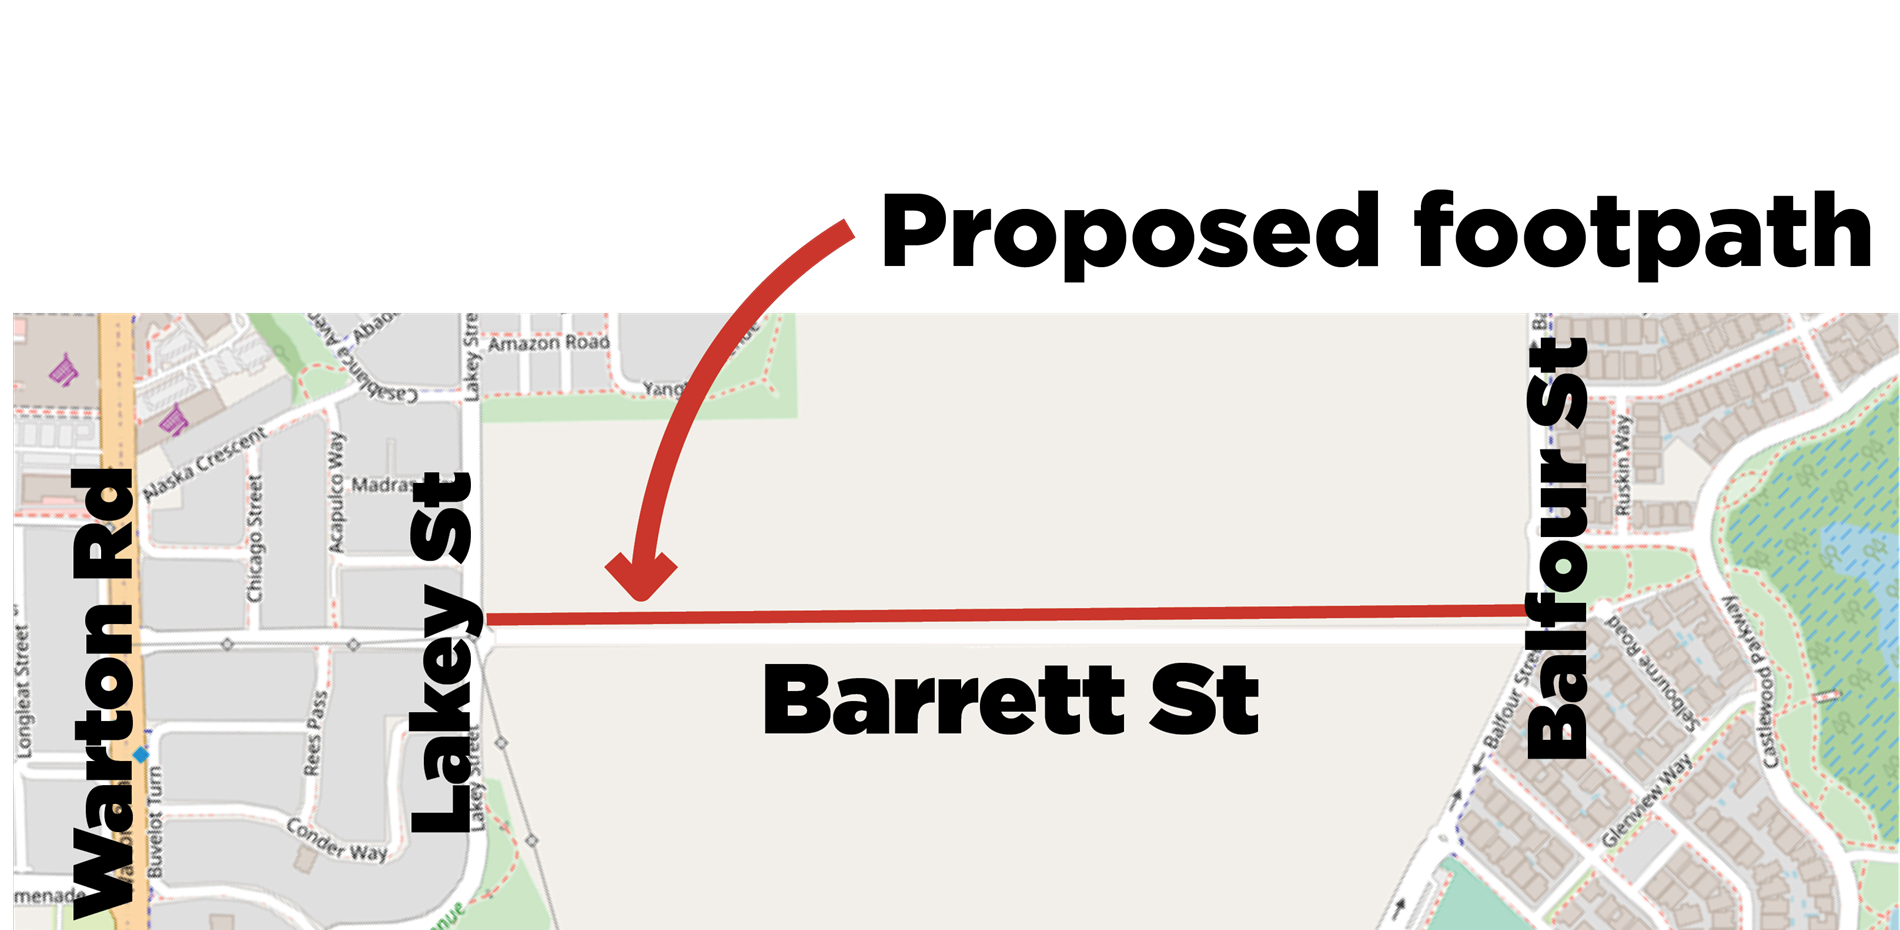 Works have commenced on the Barrett St footpath! Main Image